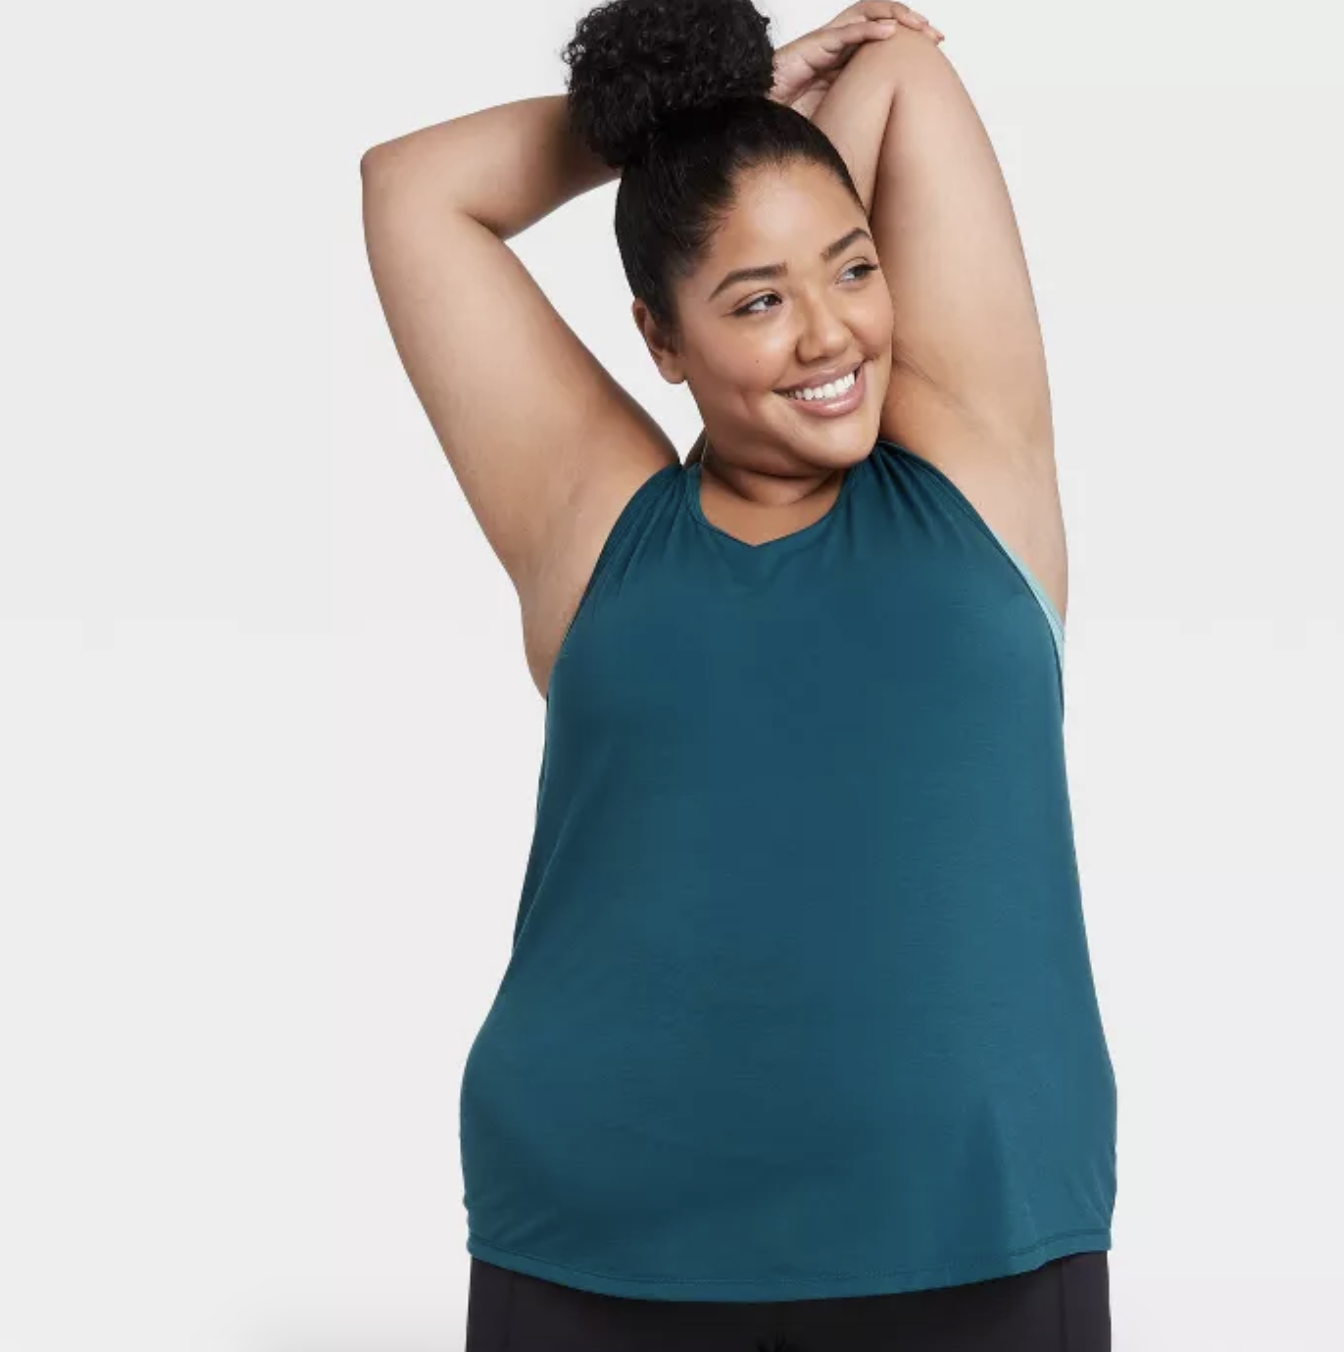 30 Pieces Of Fitness Clothing From Target You'll Probably Want For Your ...